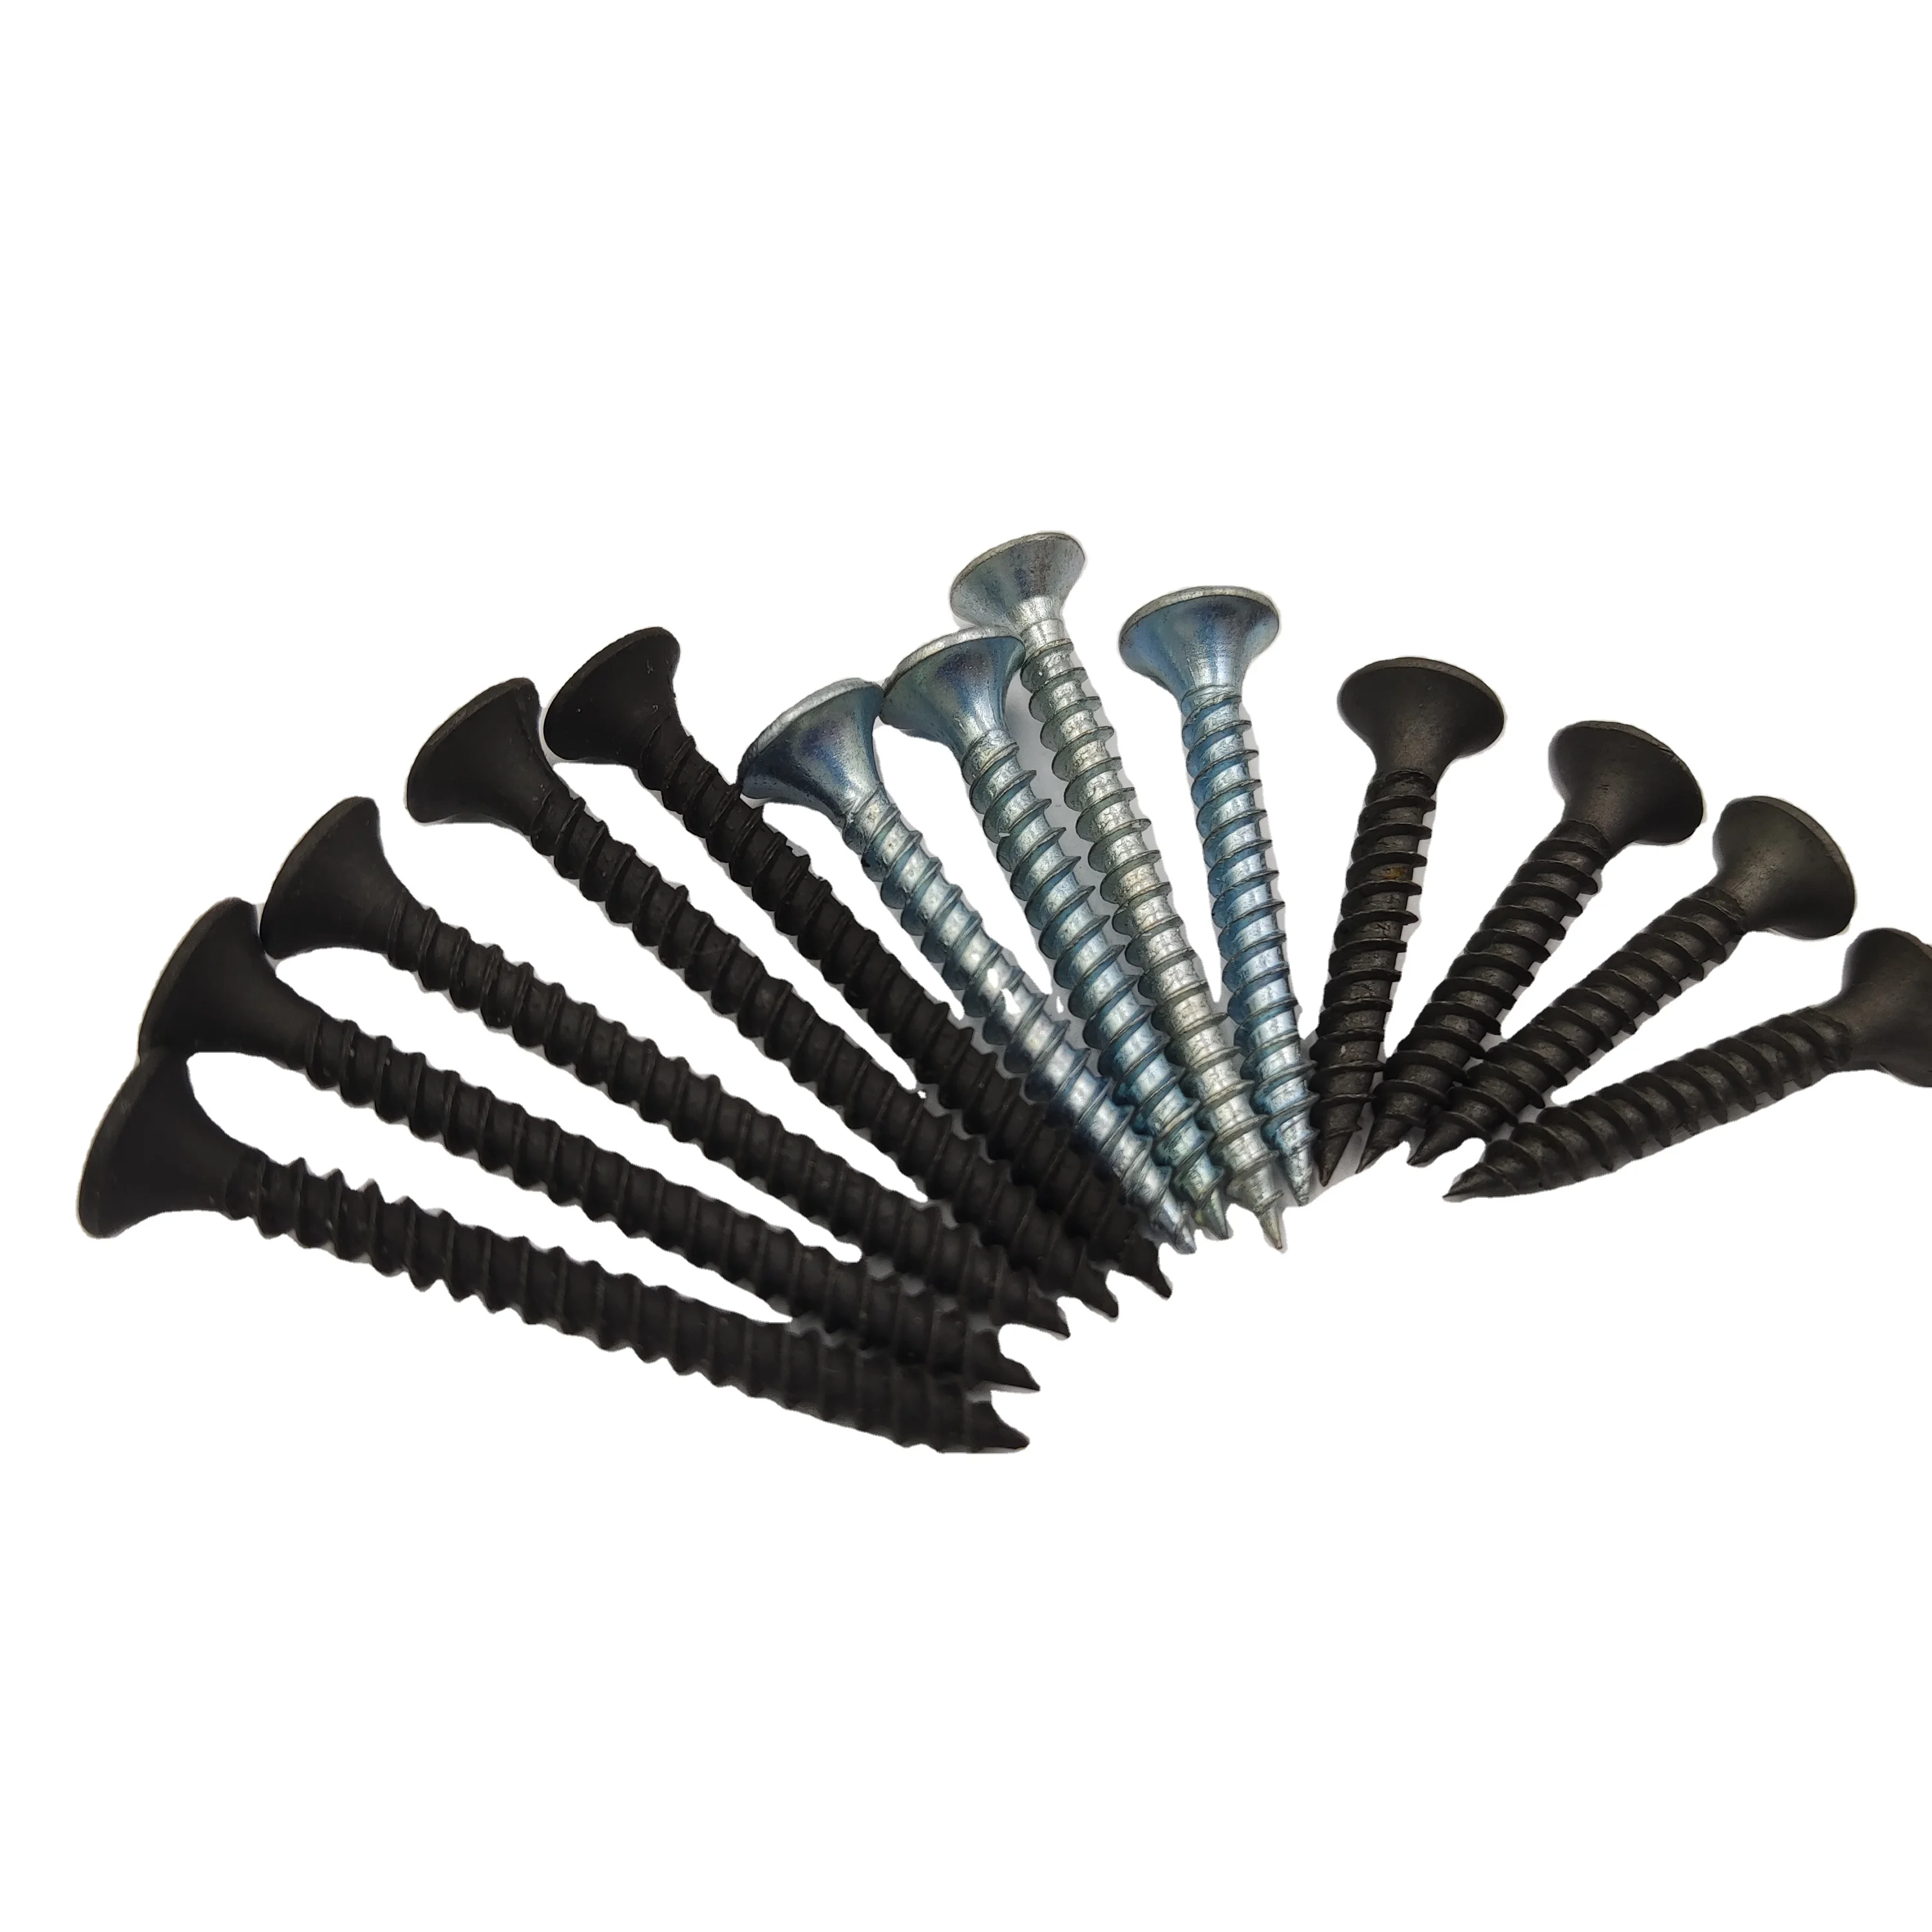 
China Tianjin drywall screw manufacturer factory with best price 